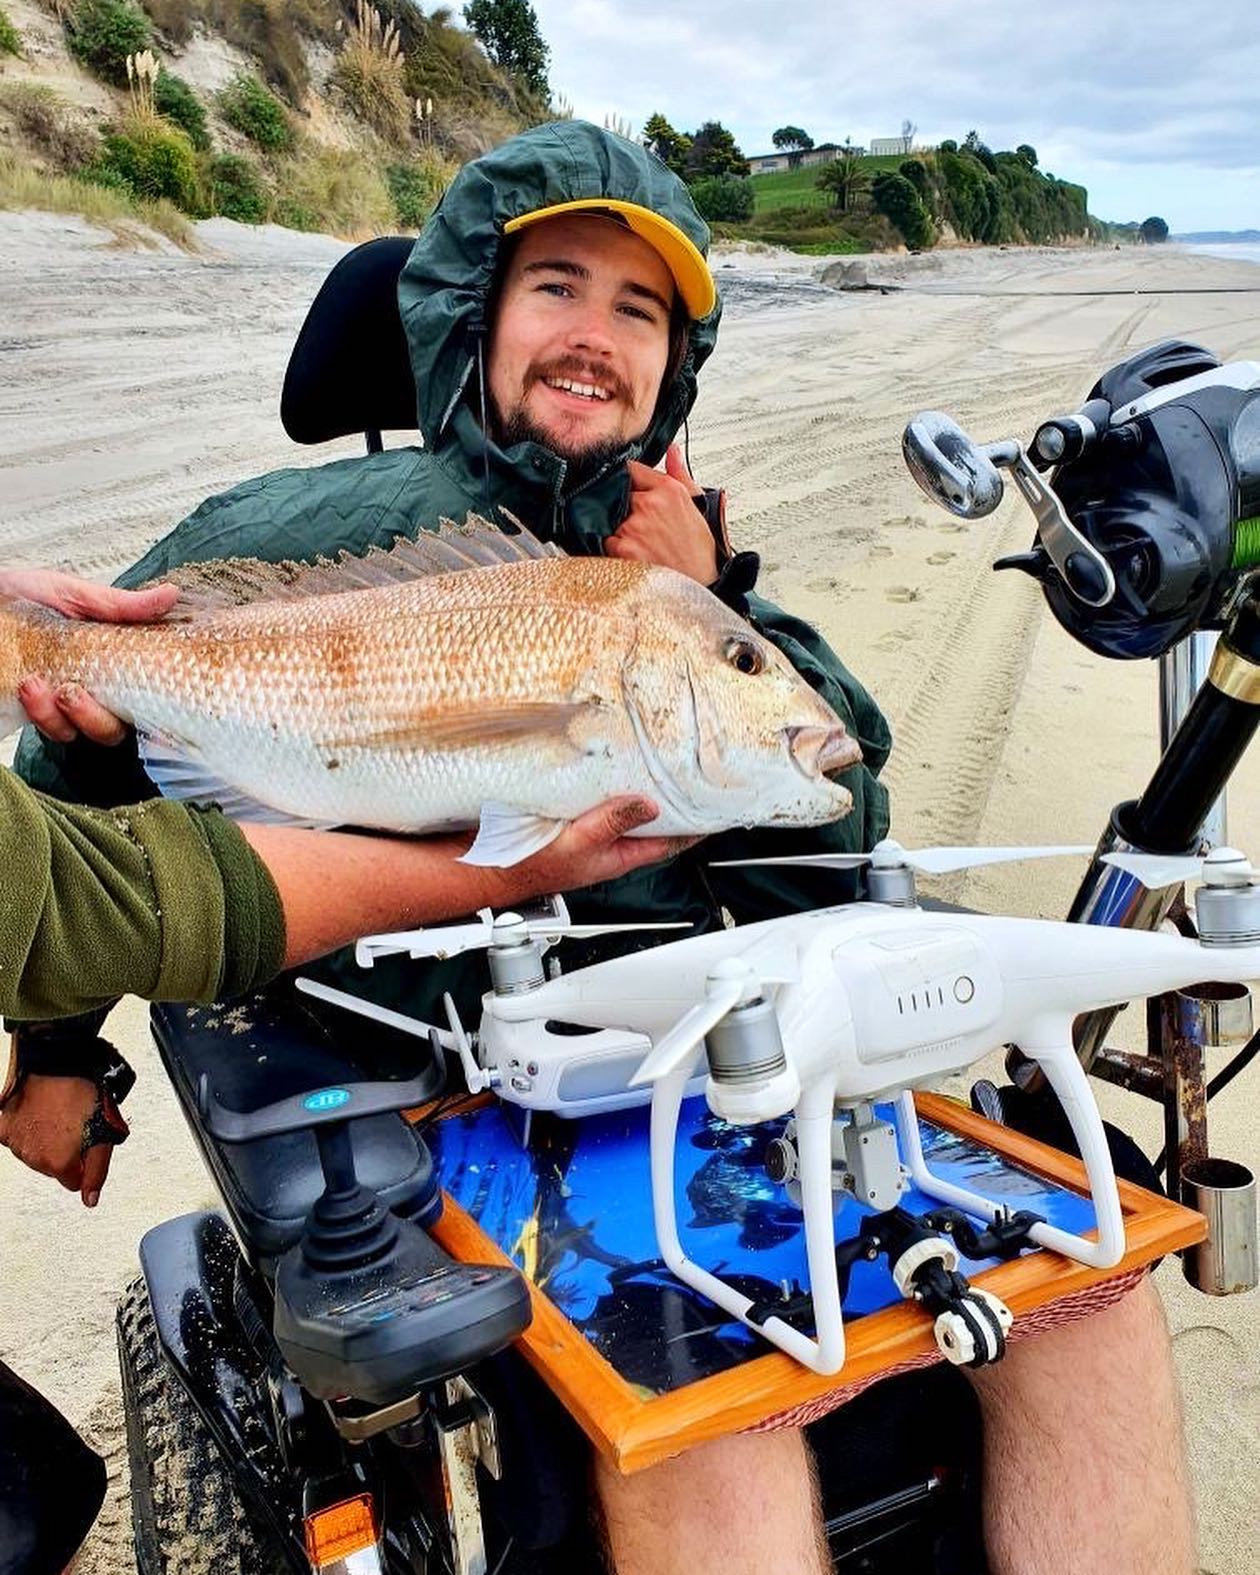 Drone fishing is catching on. Sam Fitness captured. 